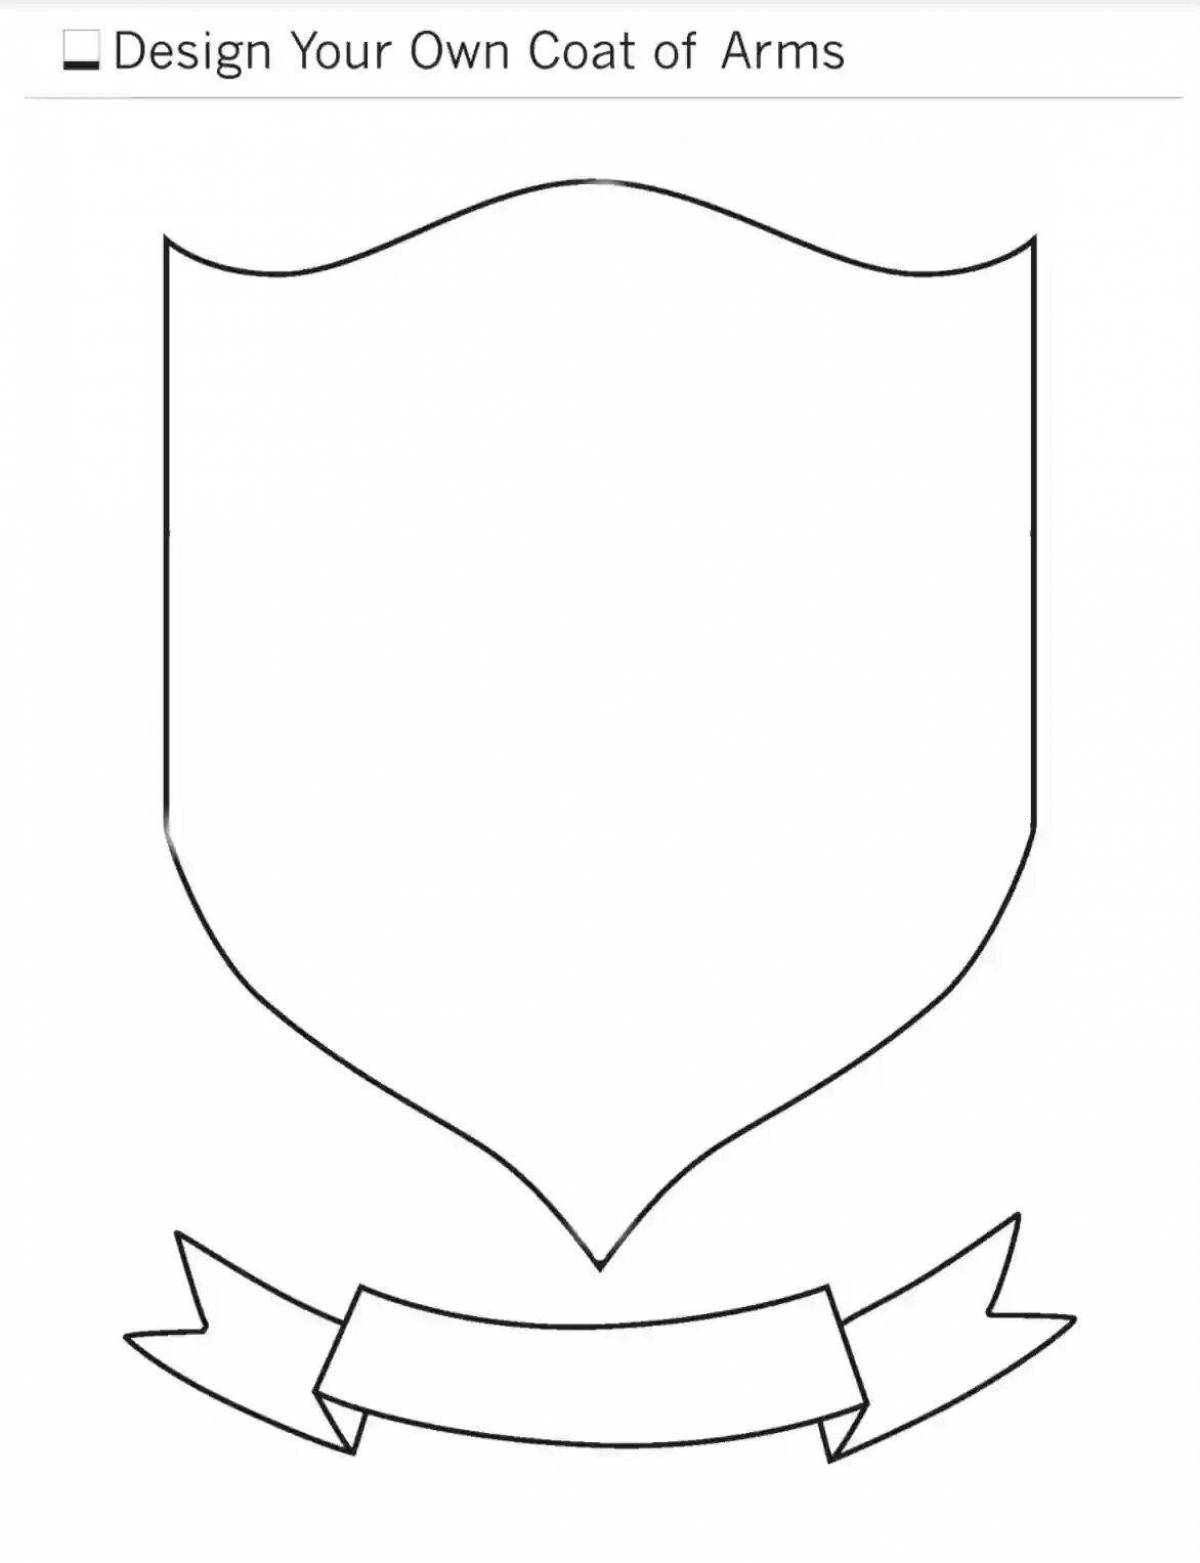 My family coat of arms #1